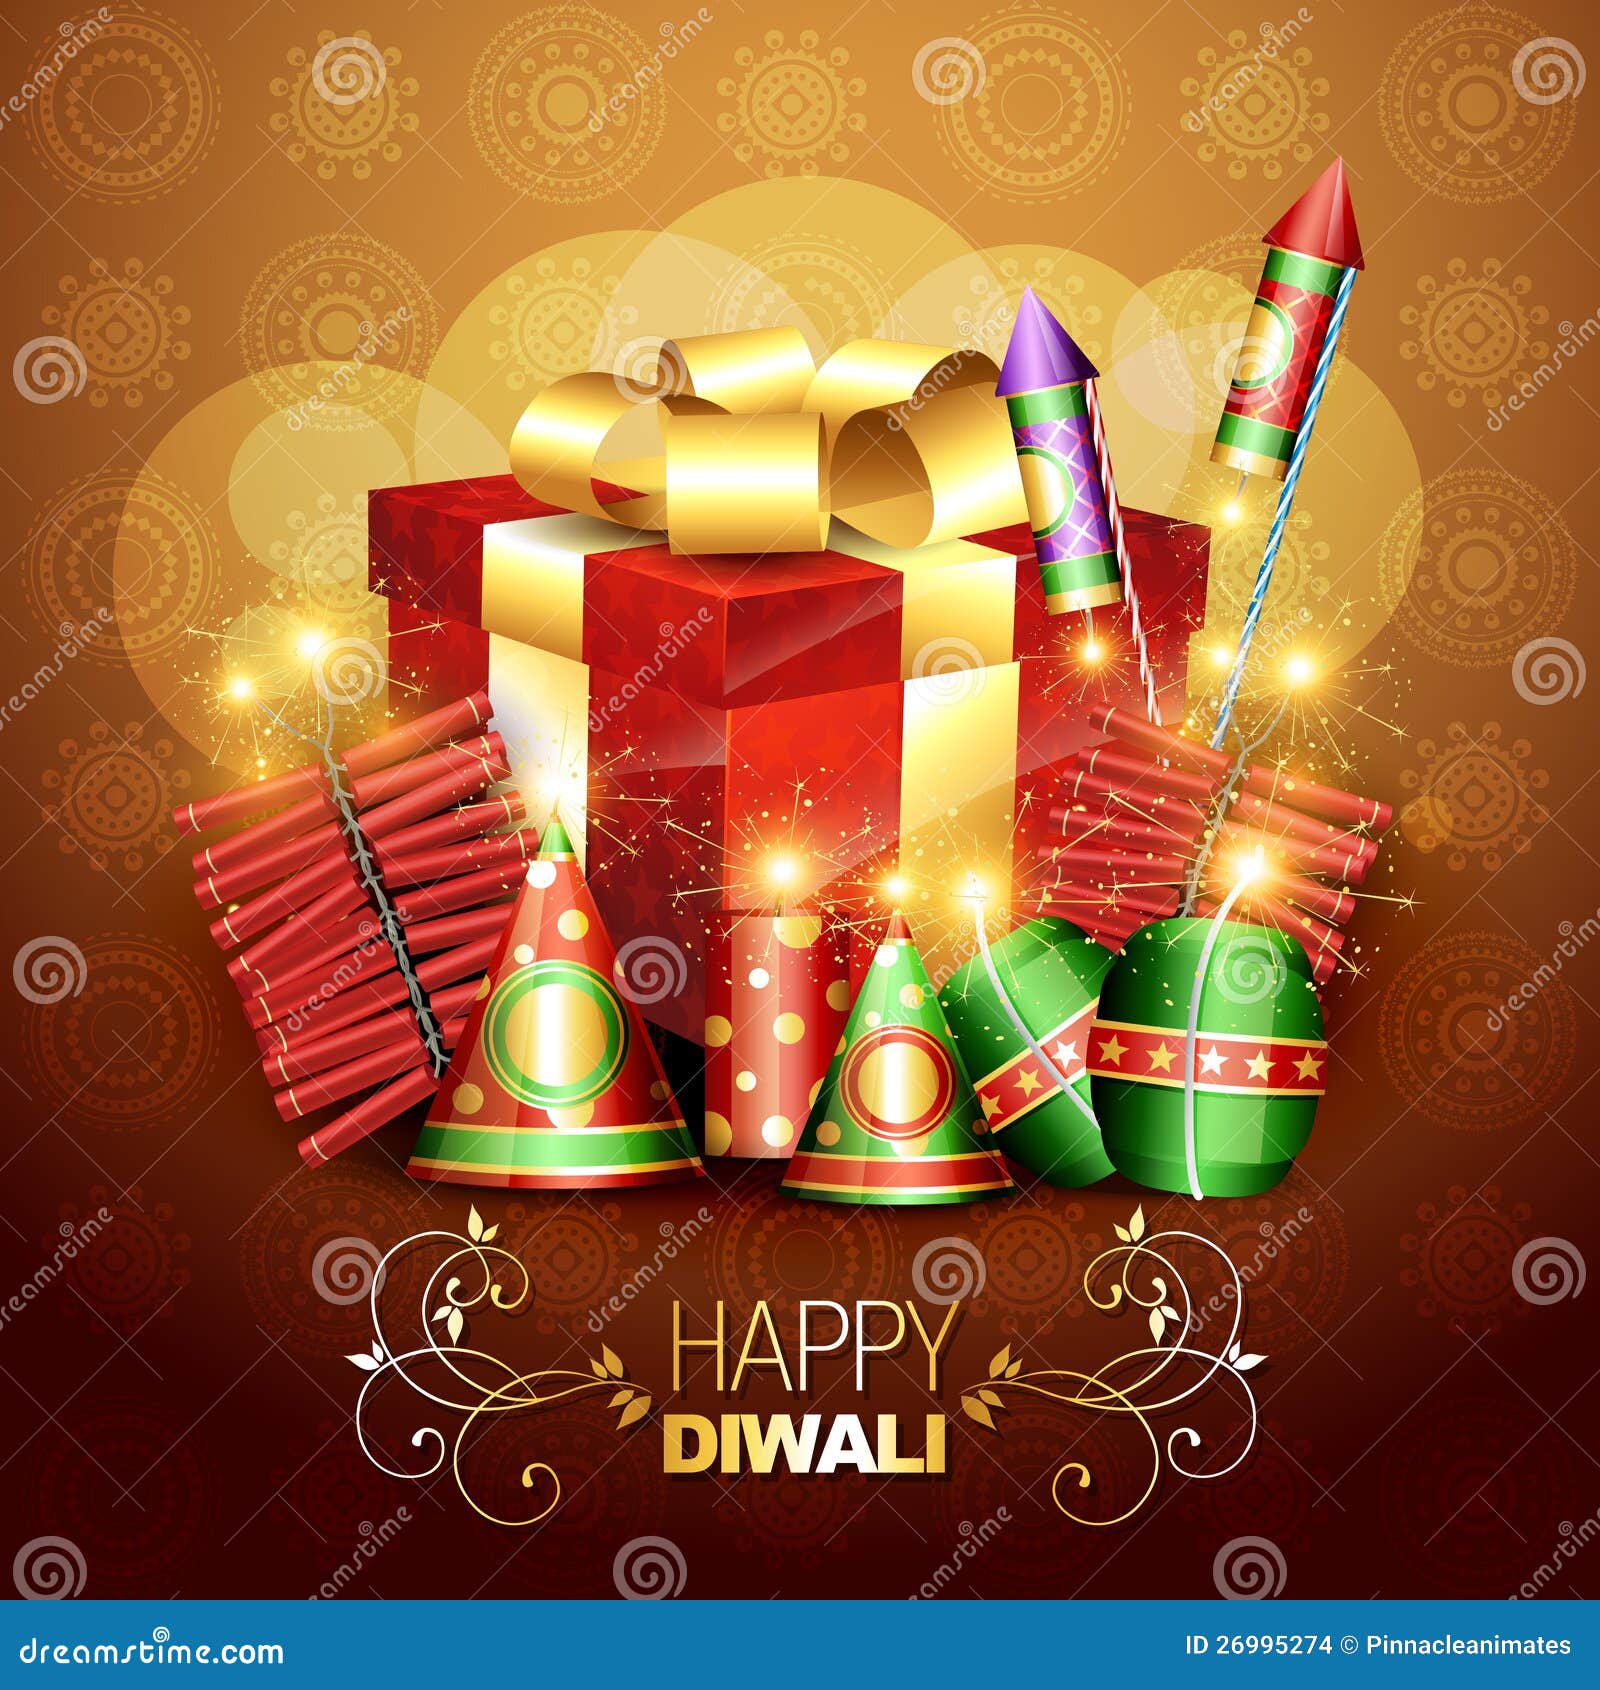 Diwali Crackers Background Stock Illustrations – 1,453 Diwali Crackers  Background Stock Illustrations, Vectors & Clipart - Dreamstime